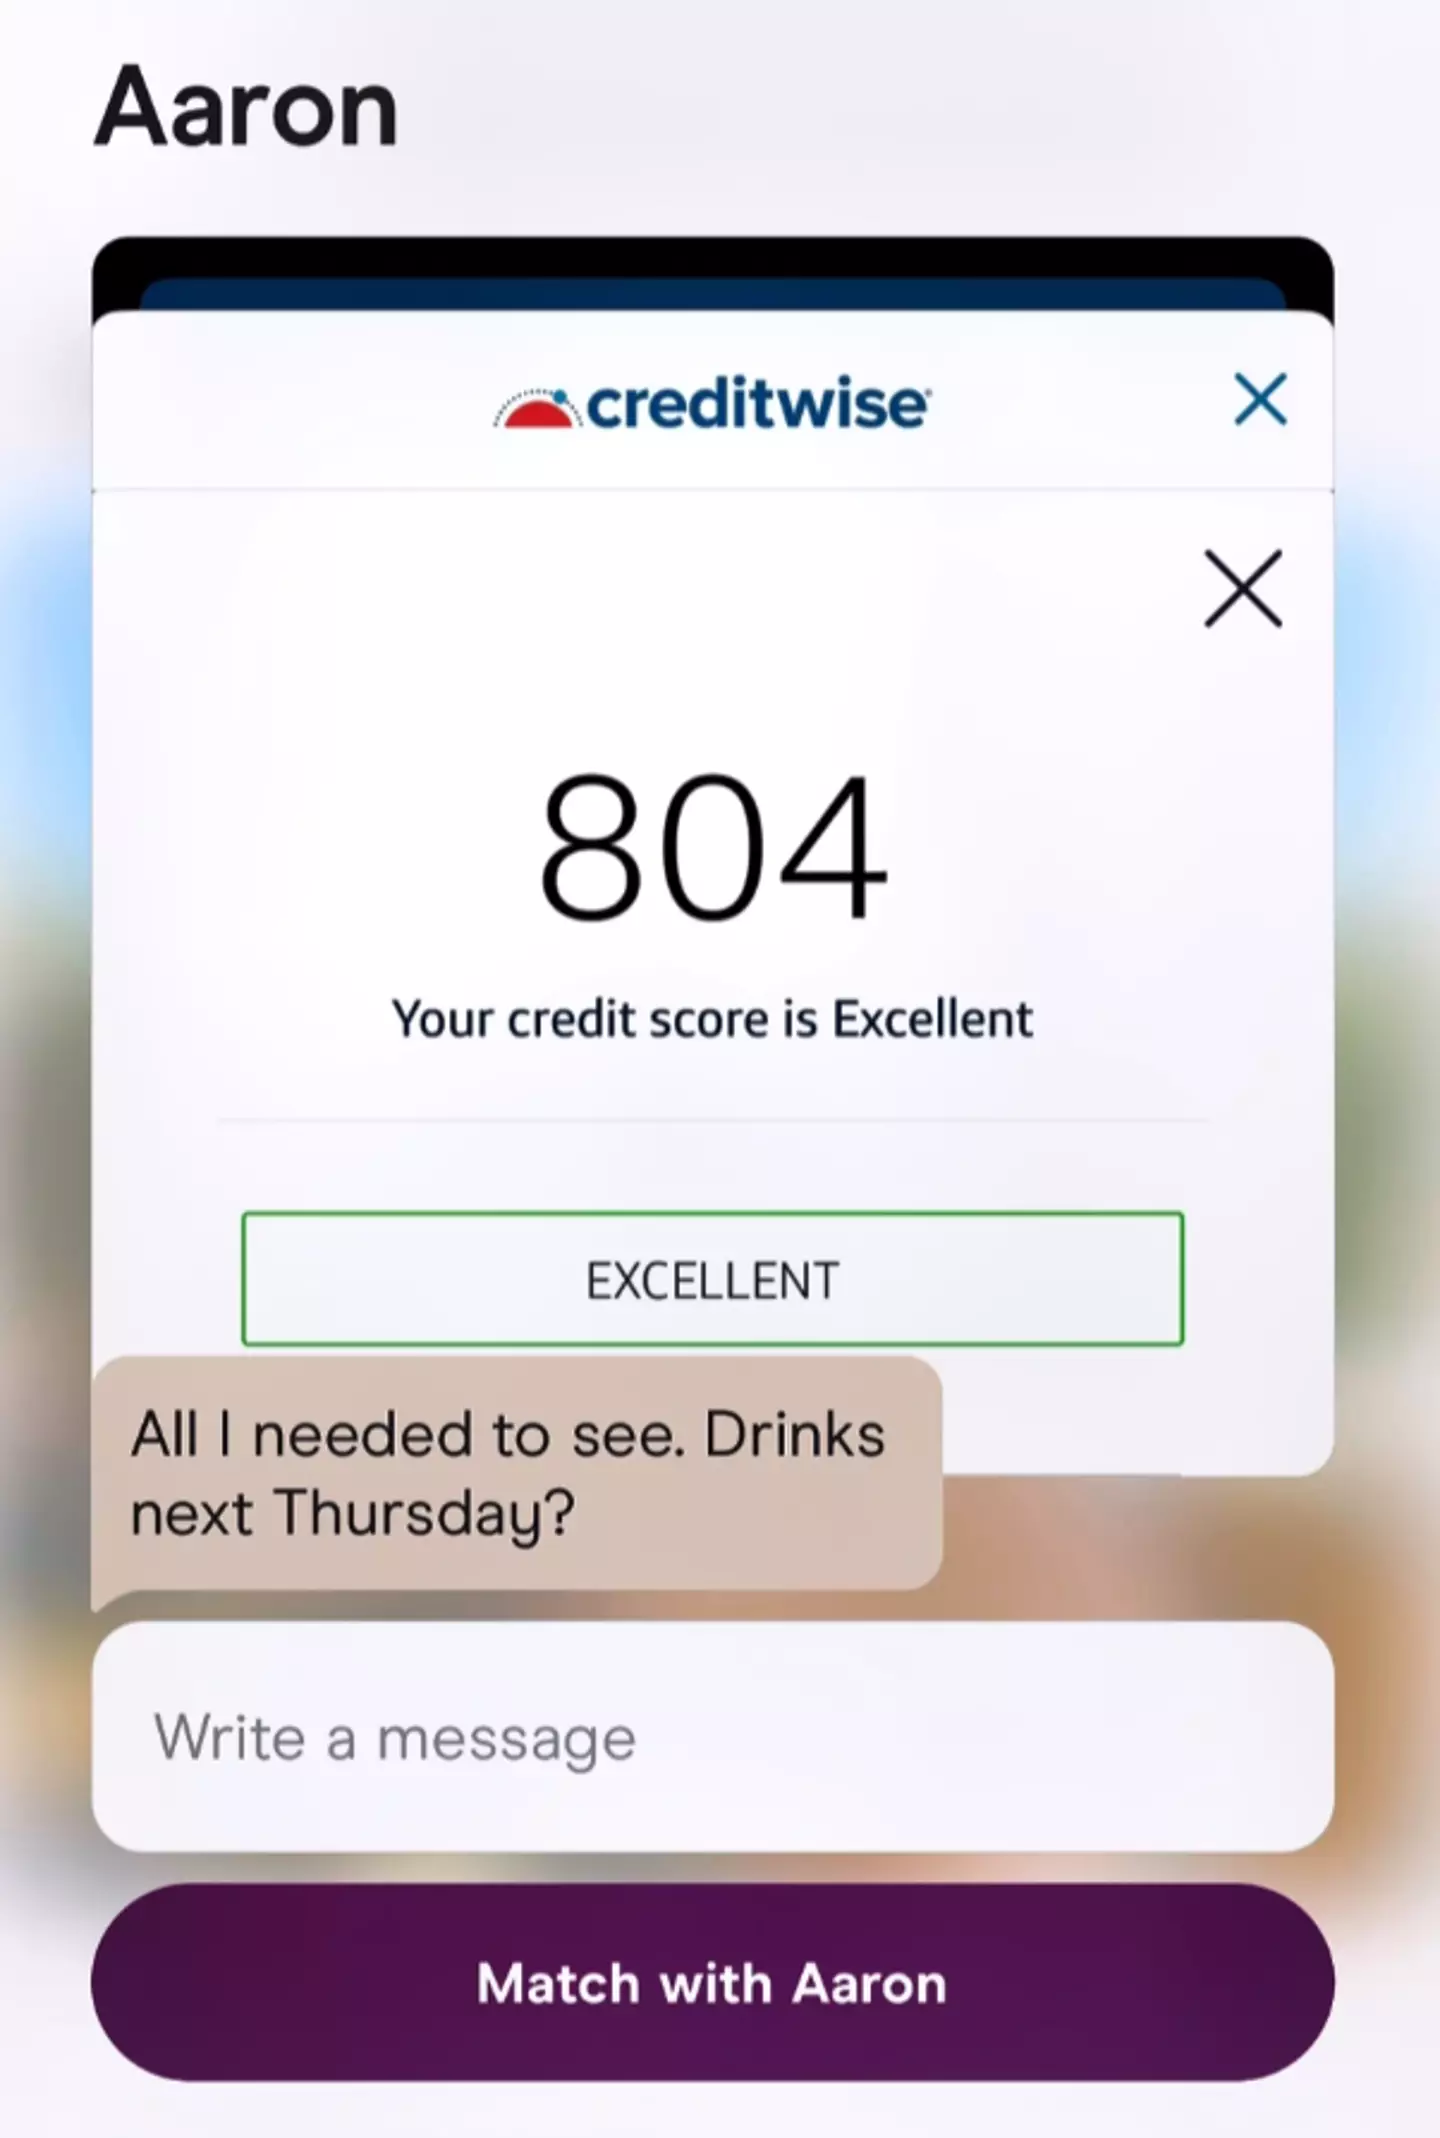 Are you a boobs or bum guy? No, sorry, I'm a credit score guy actually.